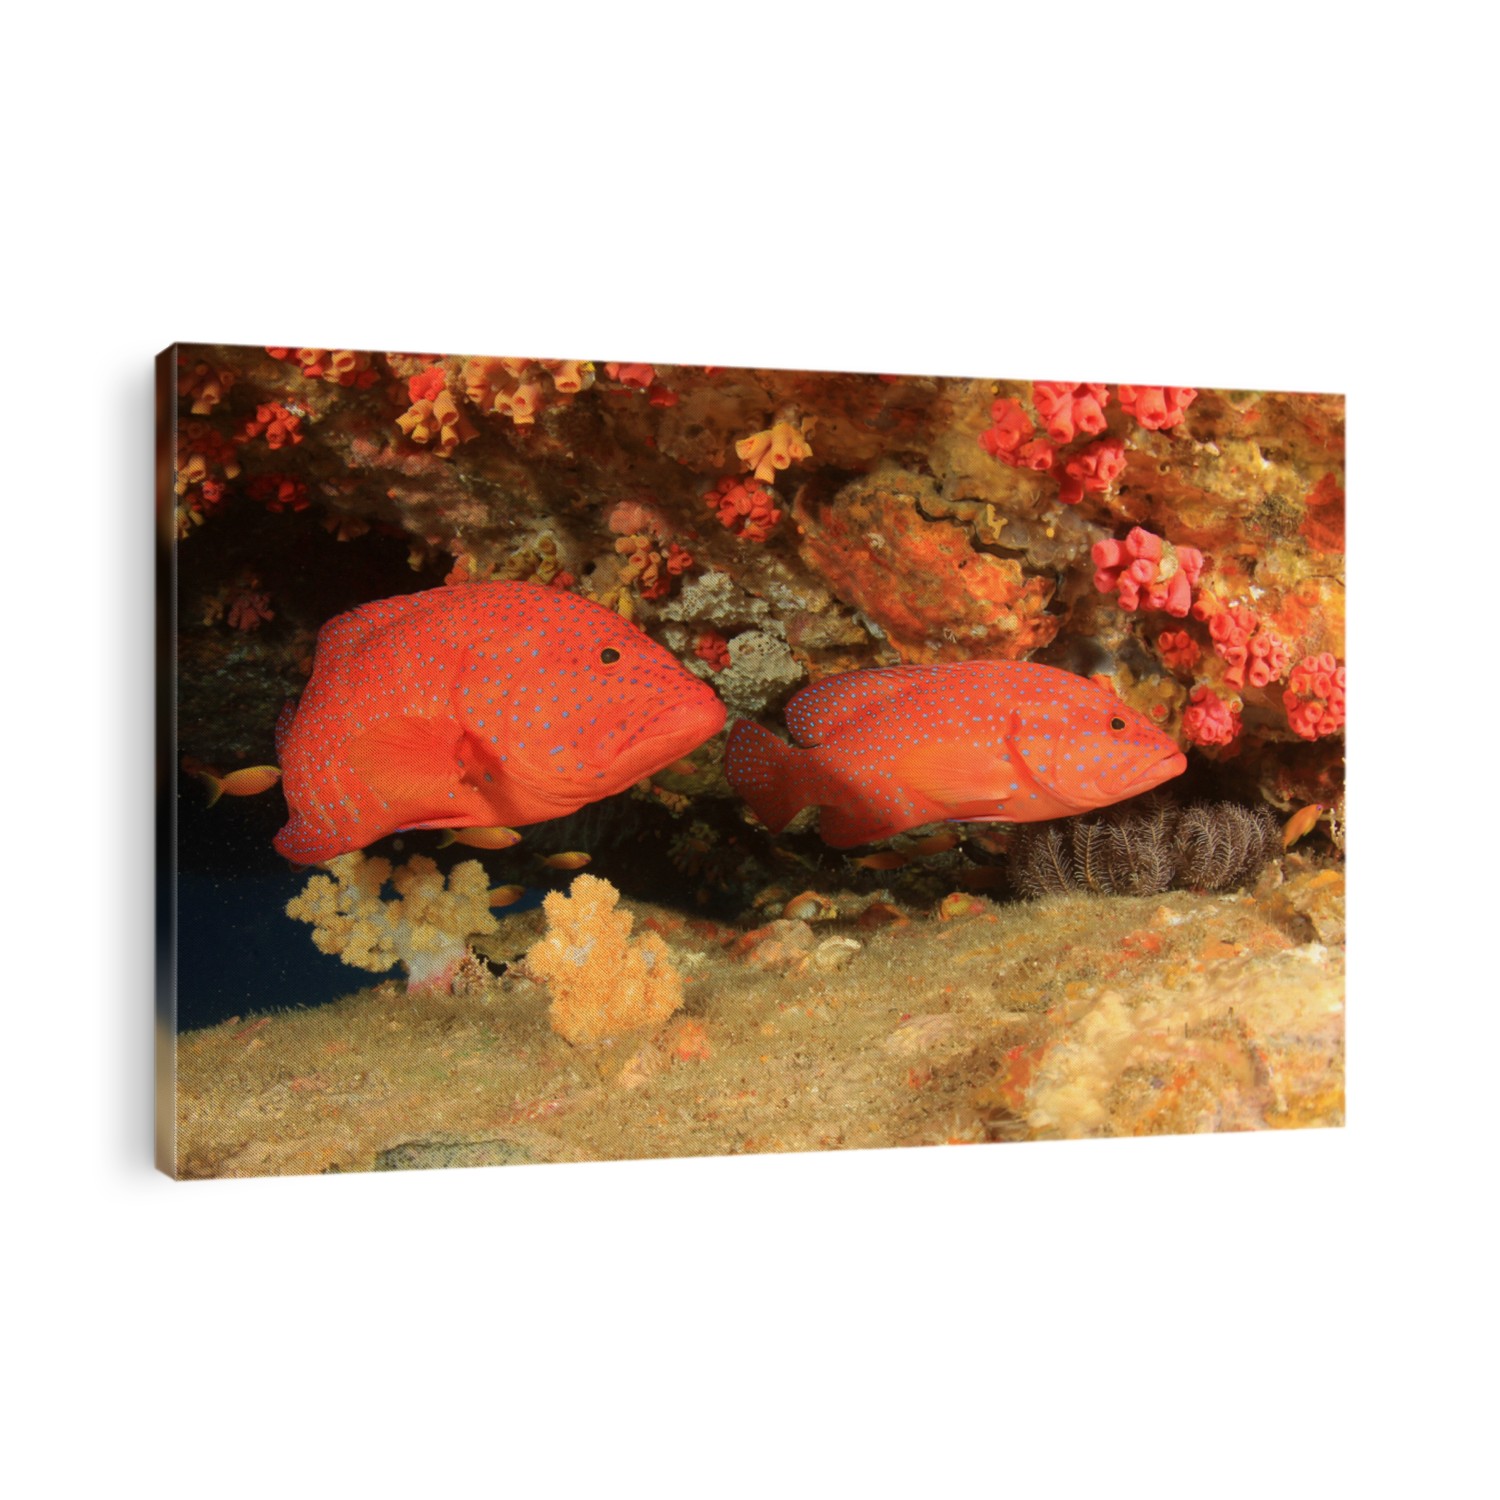 Red Coral Grouper fish